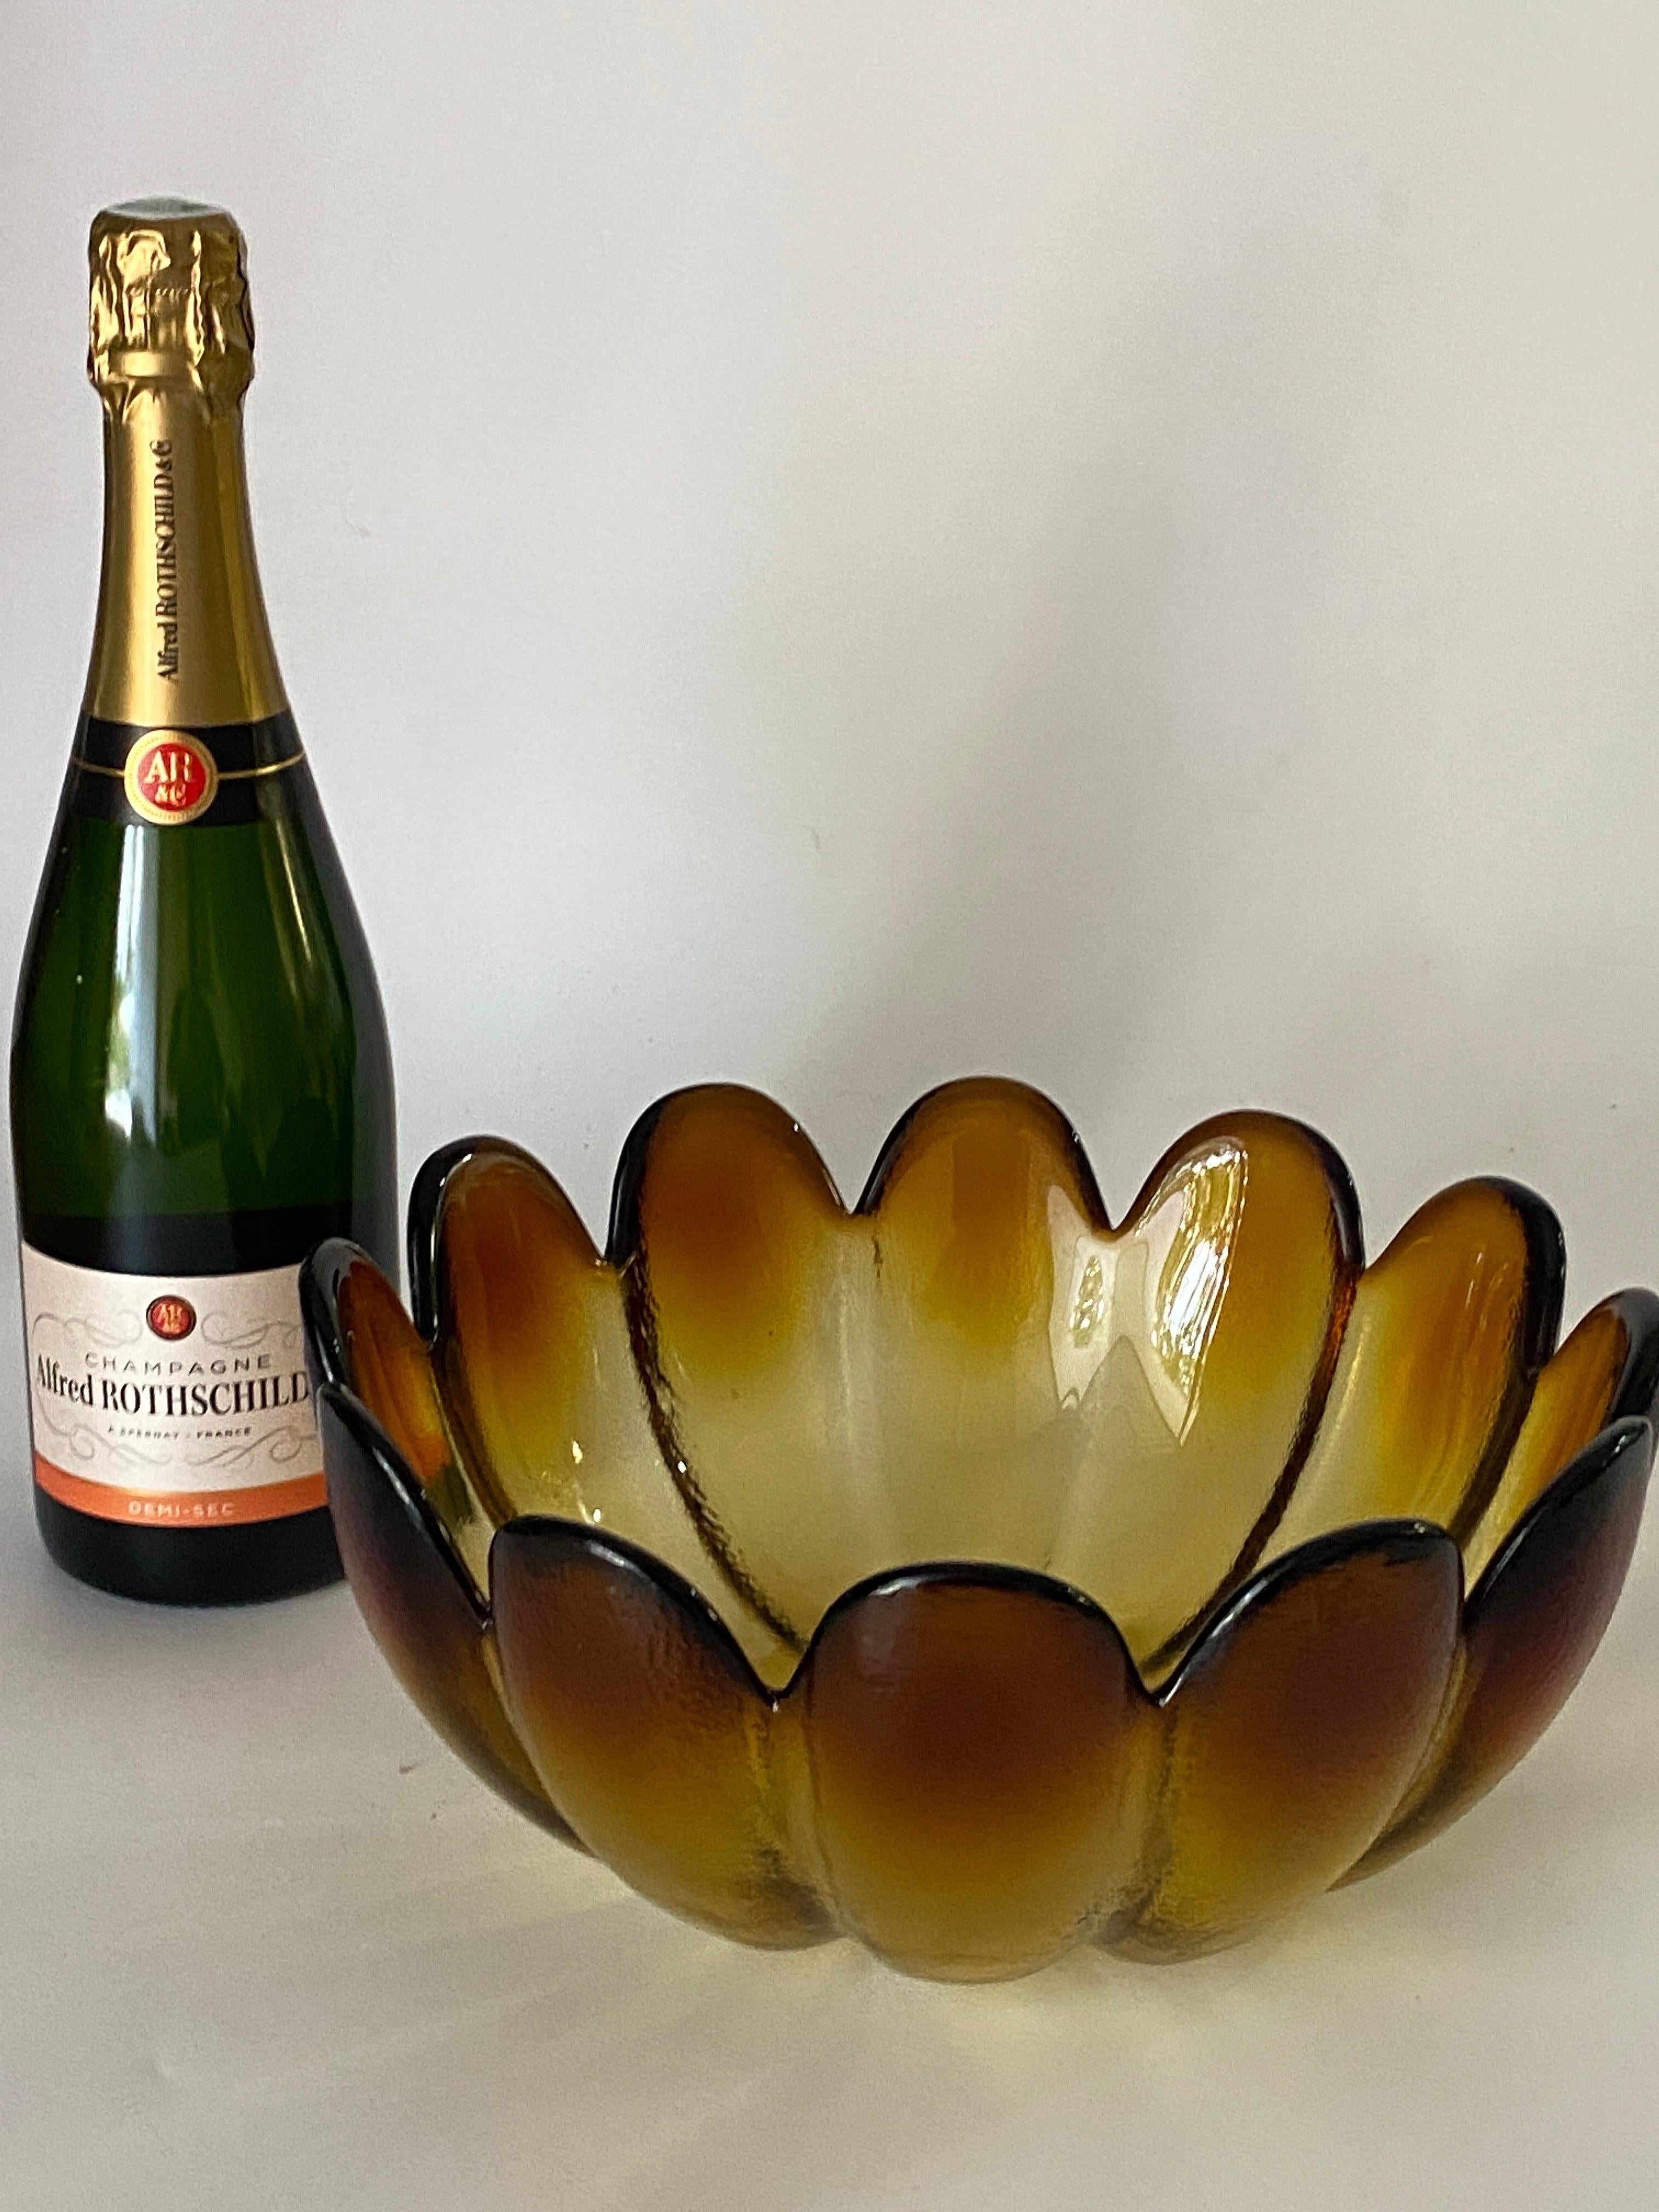 This Bowl is in Glass, Brown and orange color, it is a salad bowl.
It has been made in the 1970's, in France.